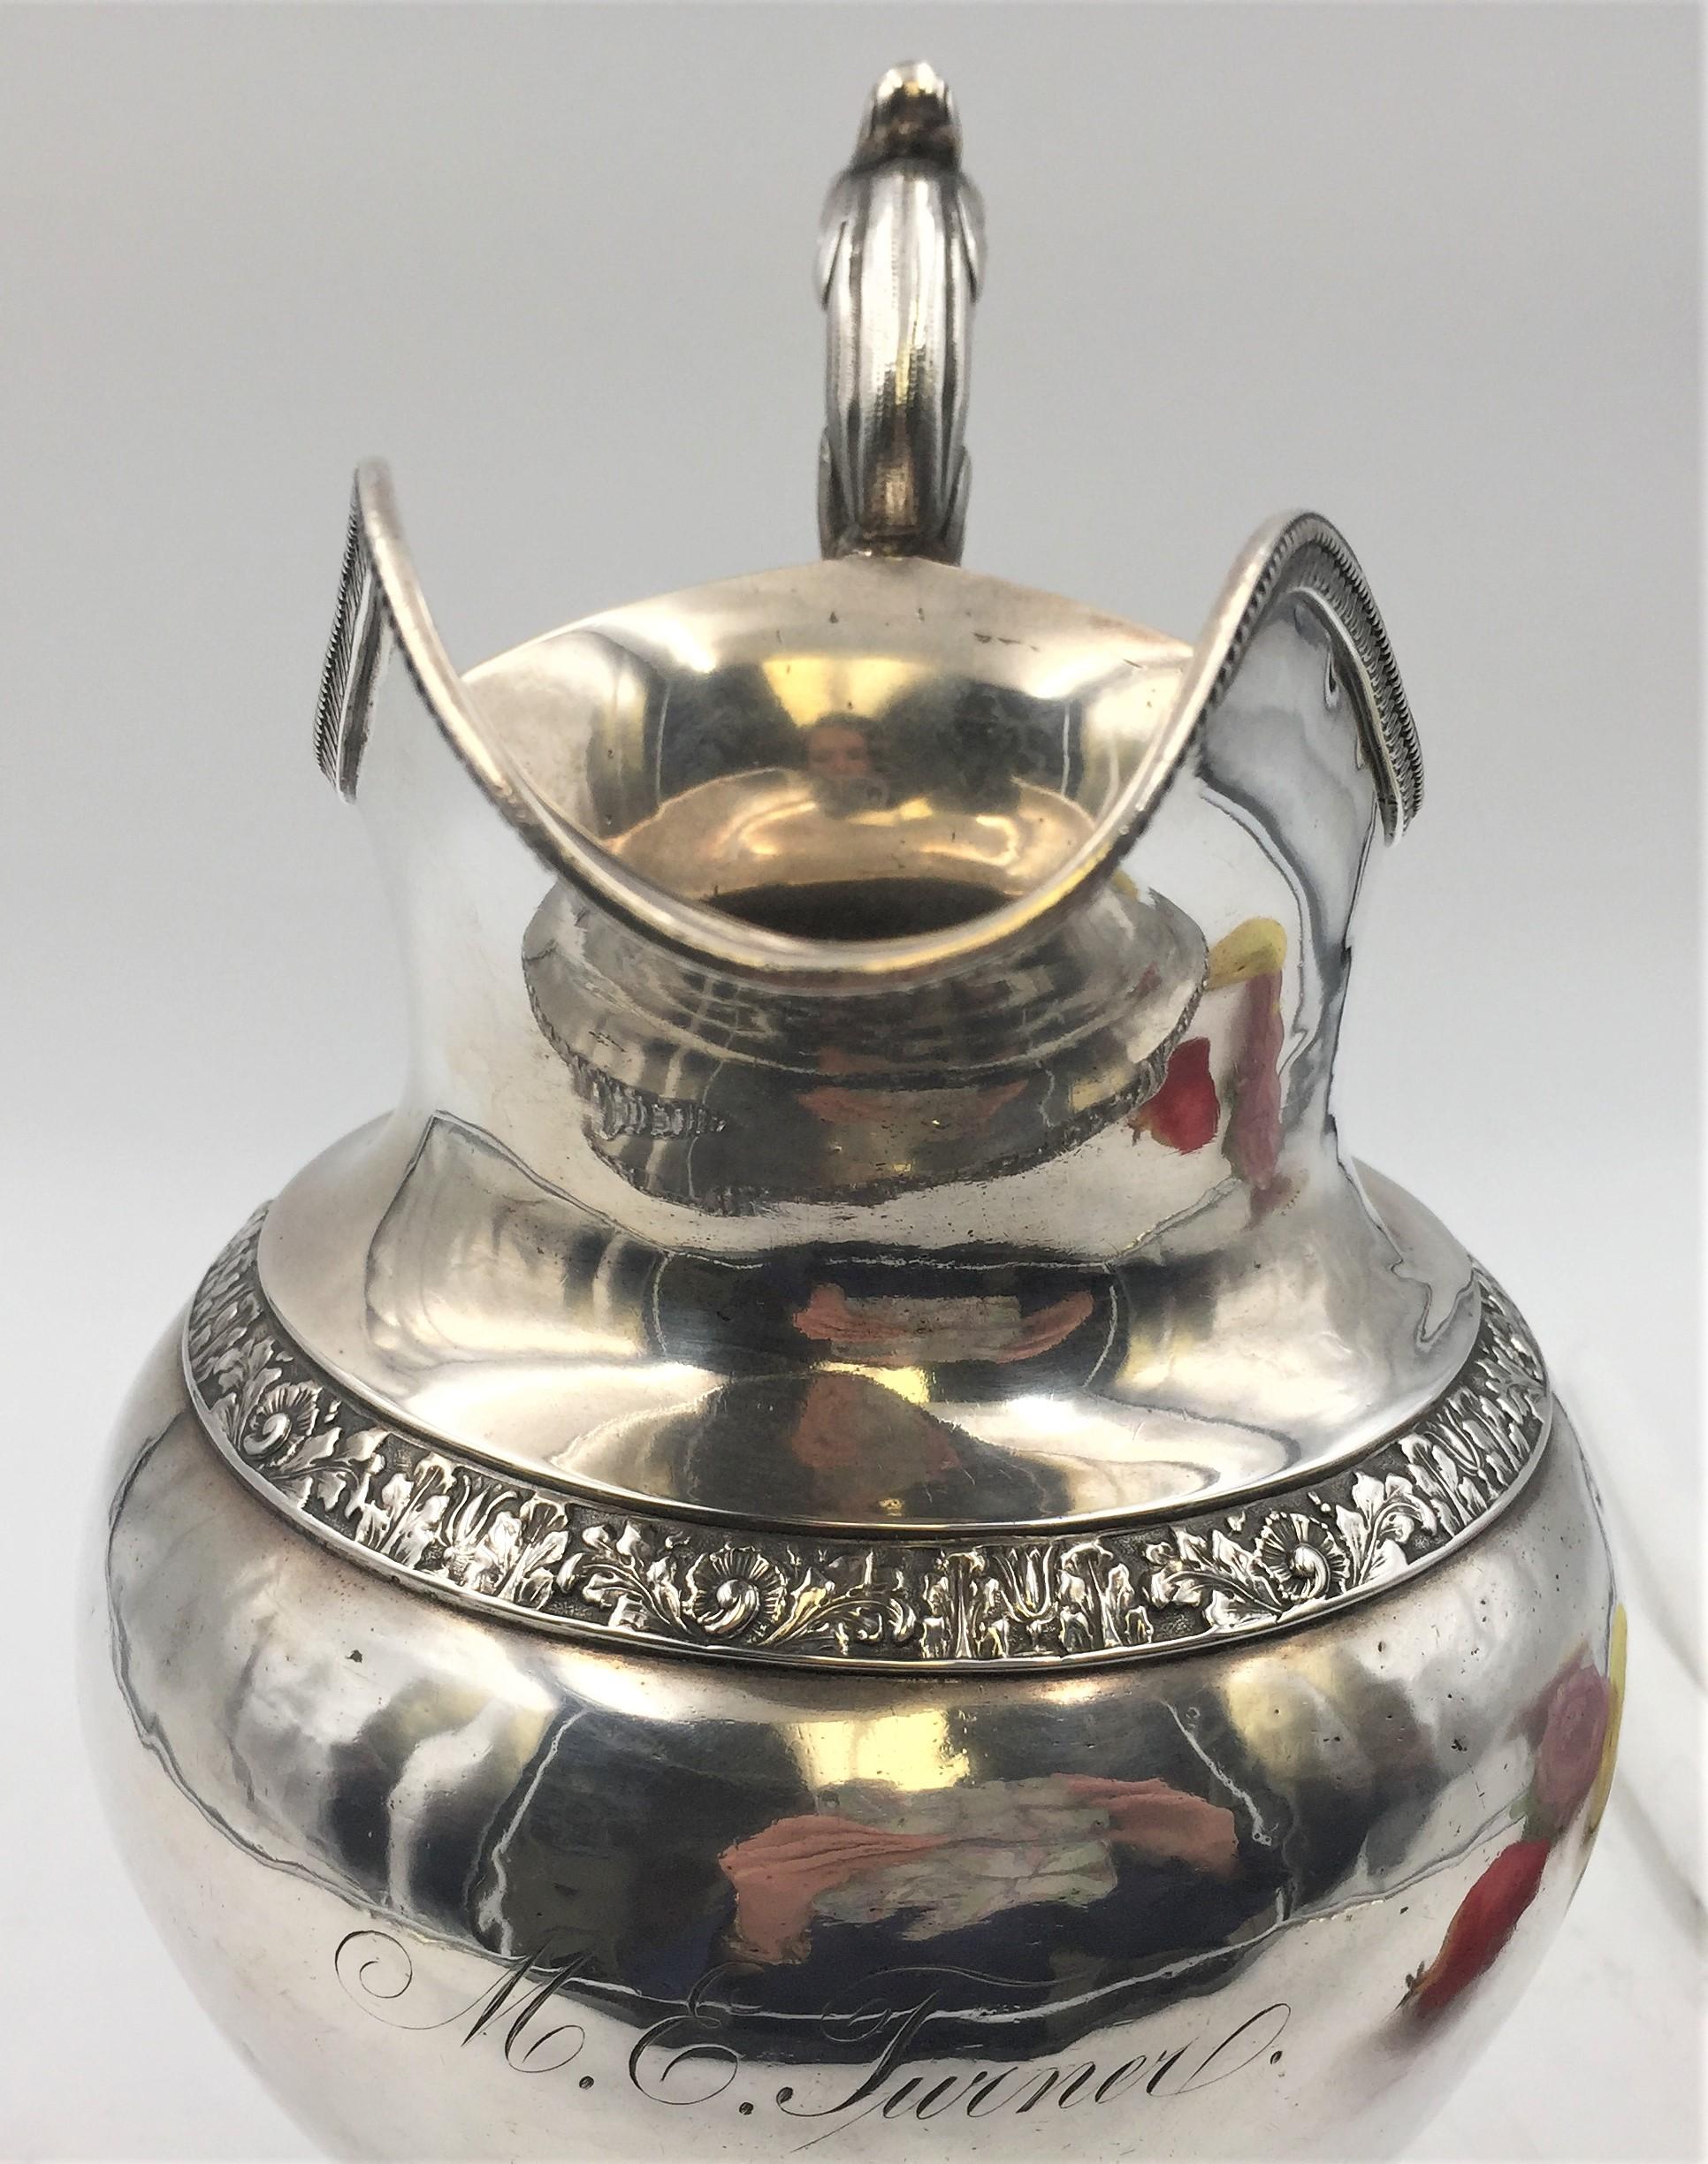 Coin silver hand hammered water pitcher circa 1850 by Philadelphia makers Bennett and Caldwell. Leaf motif along handle, leaf and floral design around body and base, intricate leaf and beading around rim of spout. Measuring 12 inches tall and 9 1/2